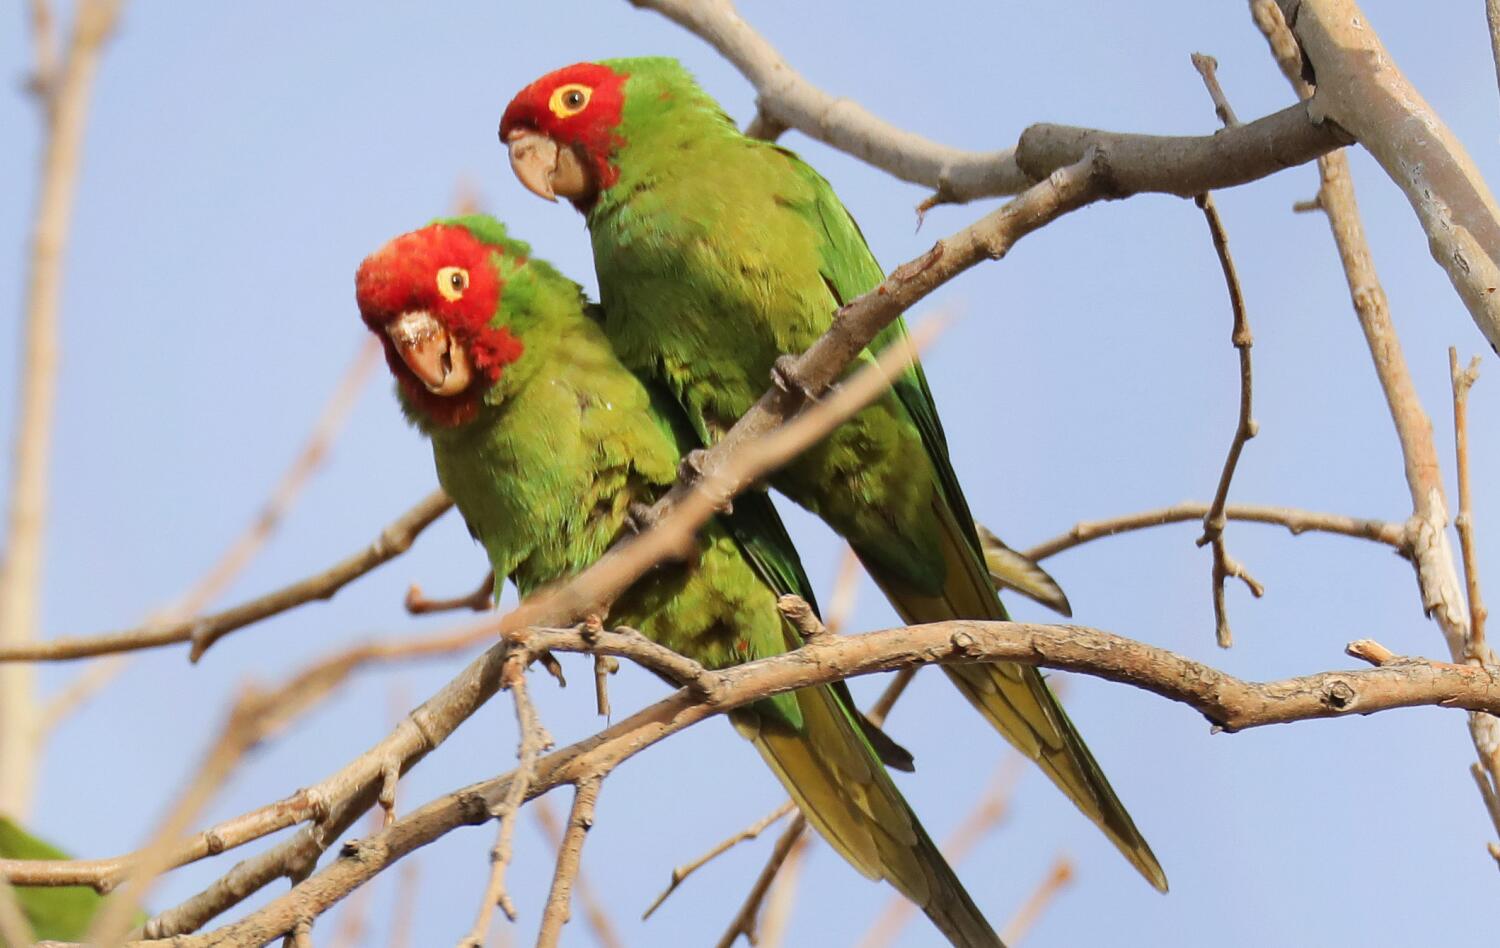 Threatened in their homeland, feral Mexican parrots thrive on L.A.'s exotic landscaping